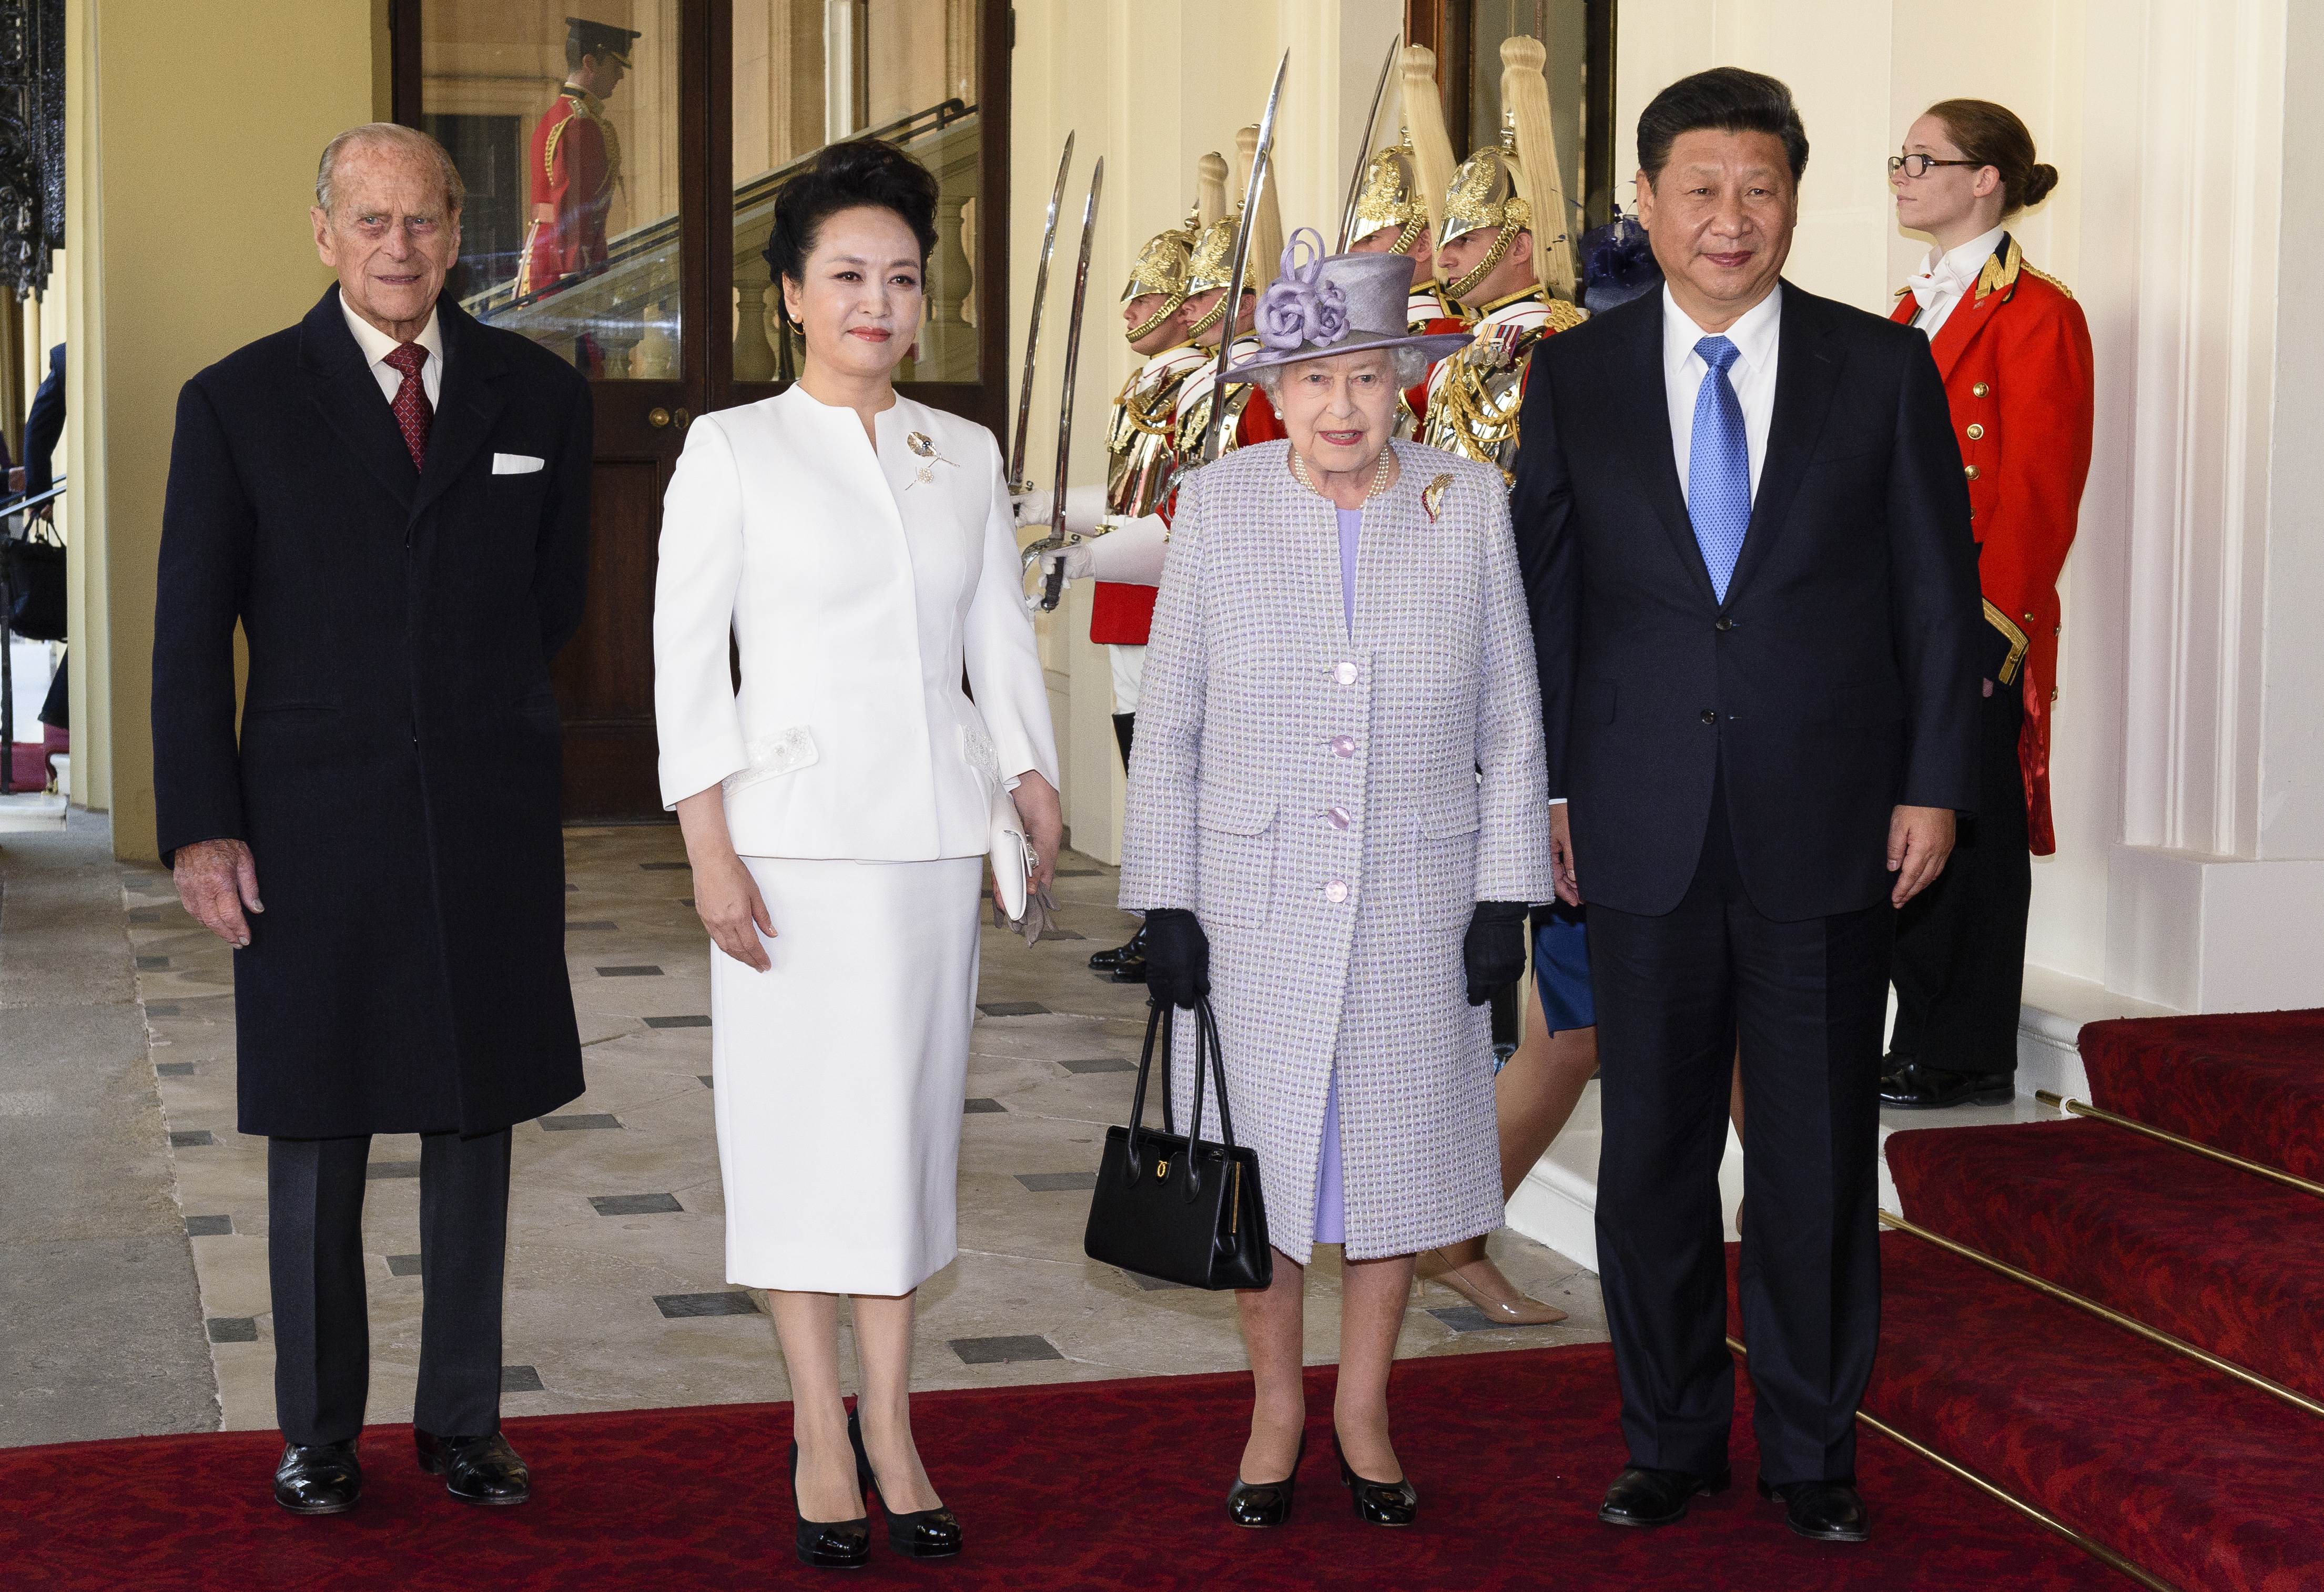 (L-R) Britain's Prince Philip, Duke of Edinburgh, China's First Lady Peng Liyuan, Britain's Queen Elizabeth II and China's President Xi Jinping pose for photographers after arriving at Buckingham Palace in central London on October 20, 2015, during the ceremonial welcome on the first official day of the Chinese president's state visit. China's President Xi Jinping started a pomp-filled four-day state visit to Britain as reports emerged of a multibillion pound investment deal over Britain's new nuclear programme. AFP PHOTO / POOL / LEON NEAL